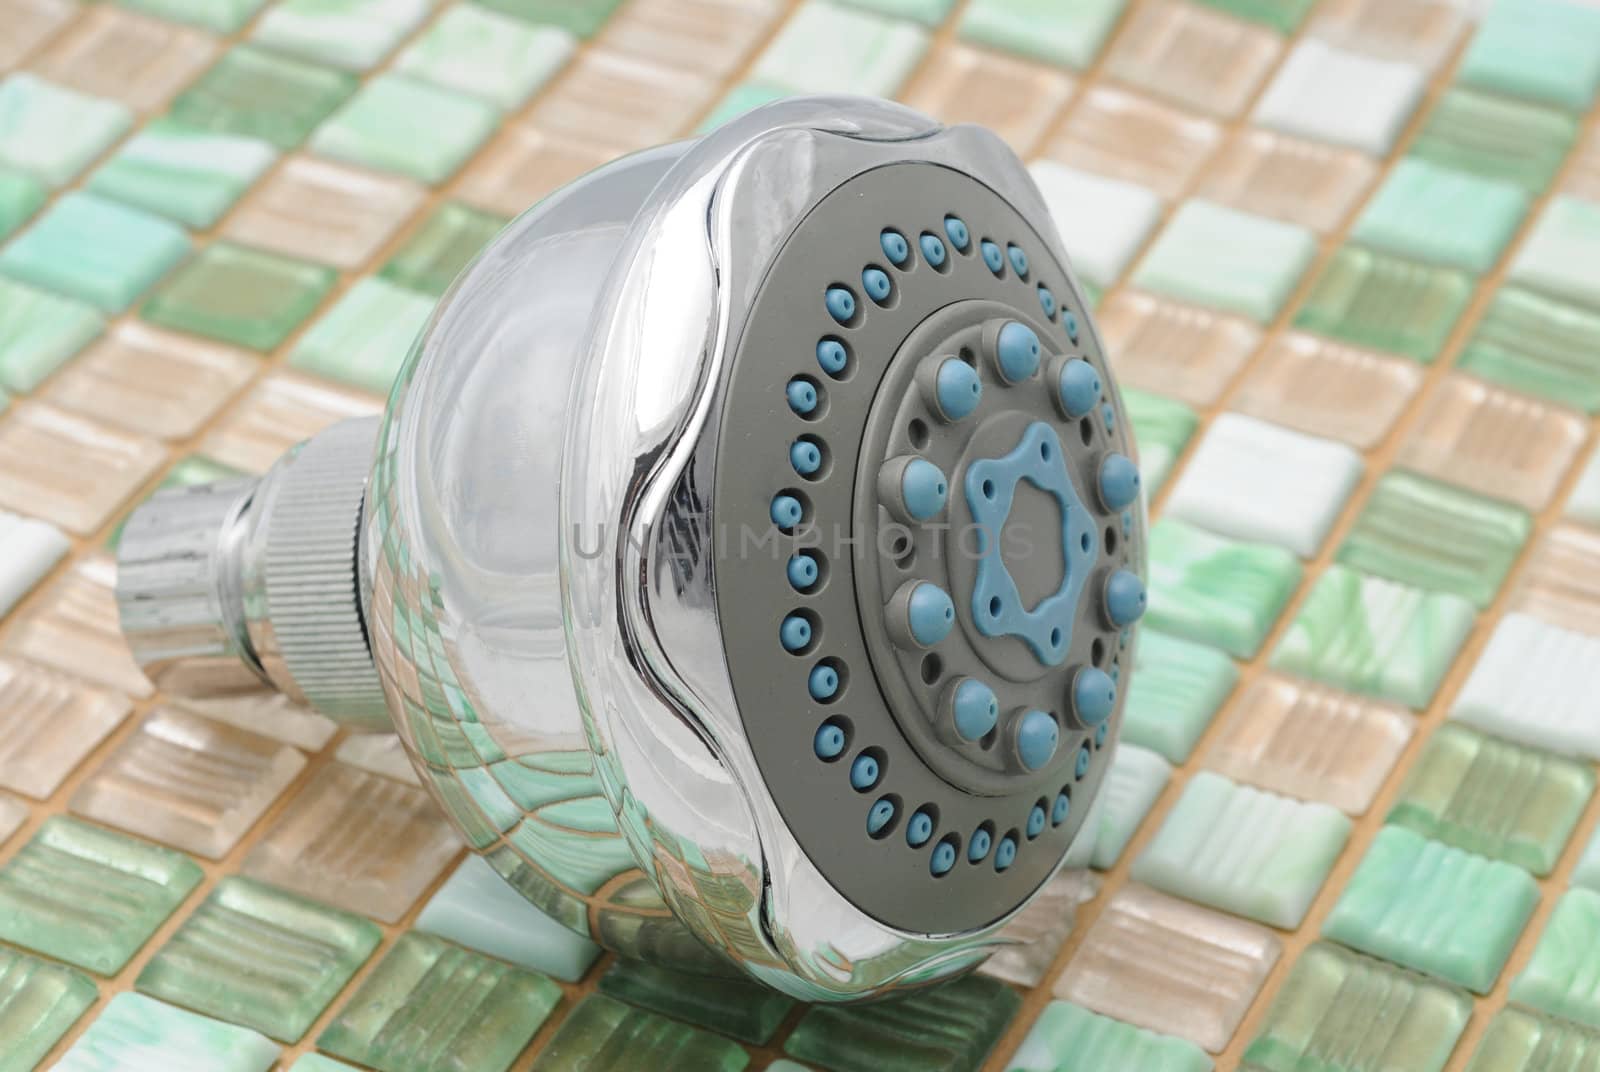 Showerhead on green and white tile background